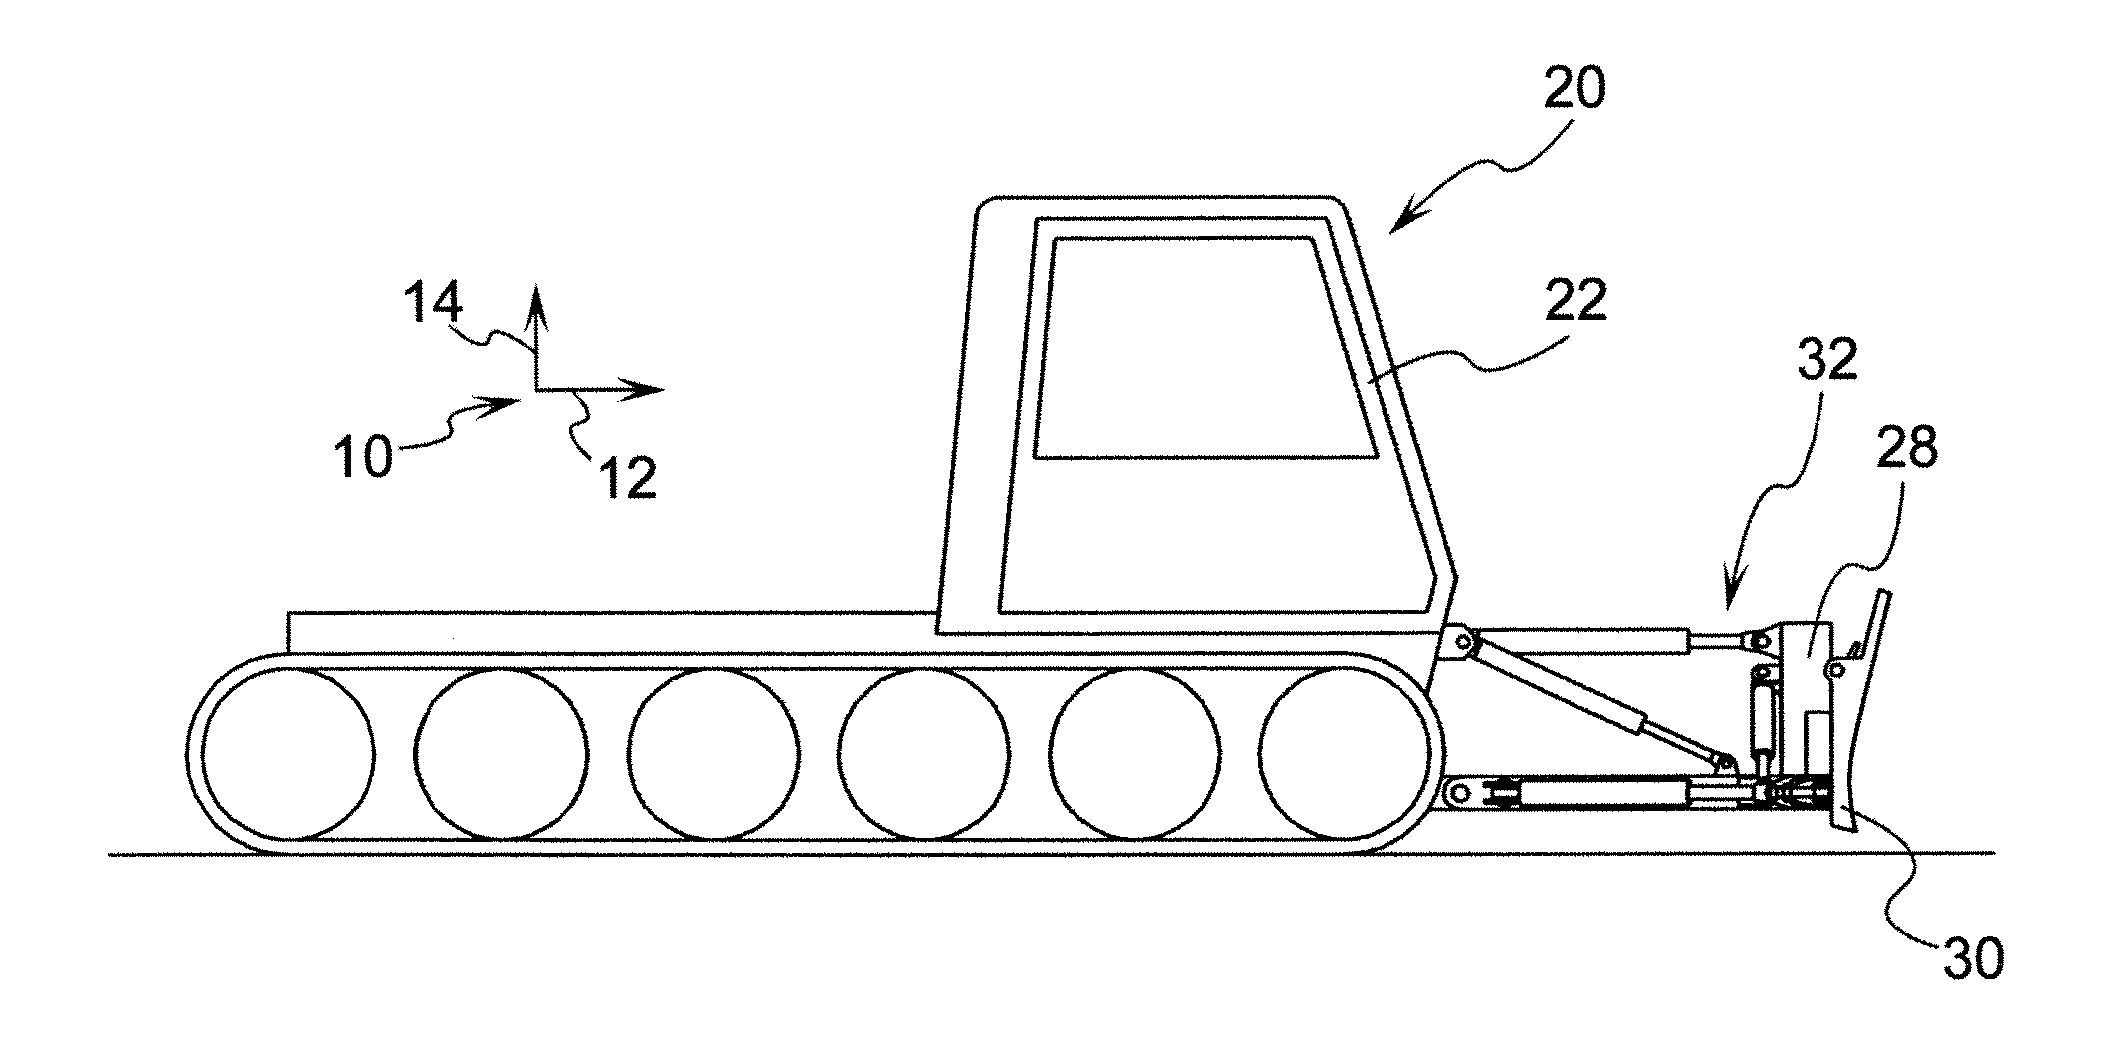 Detachable lifting mechanism for a tracked snow vehicle method and apparatus